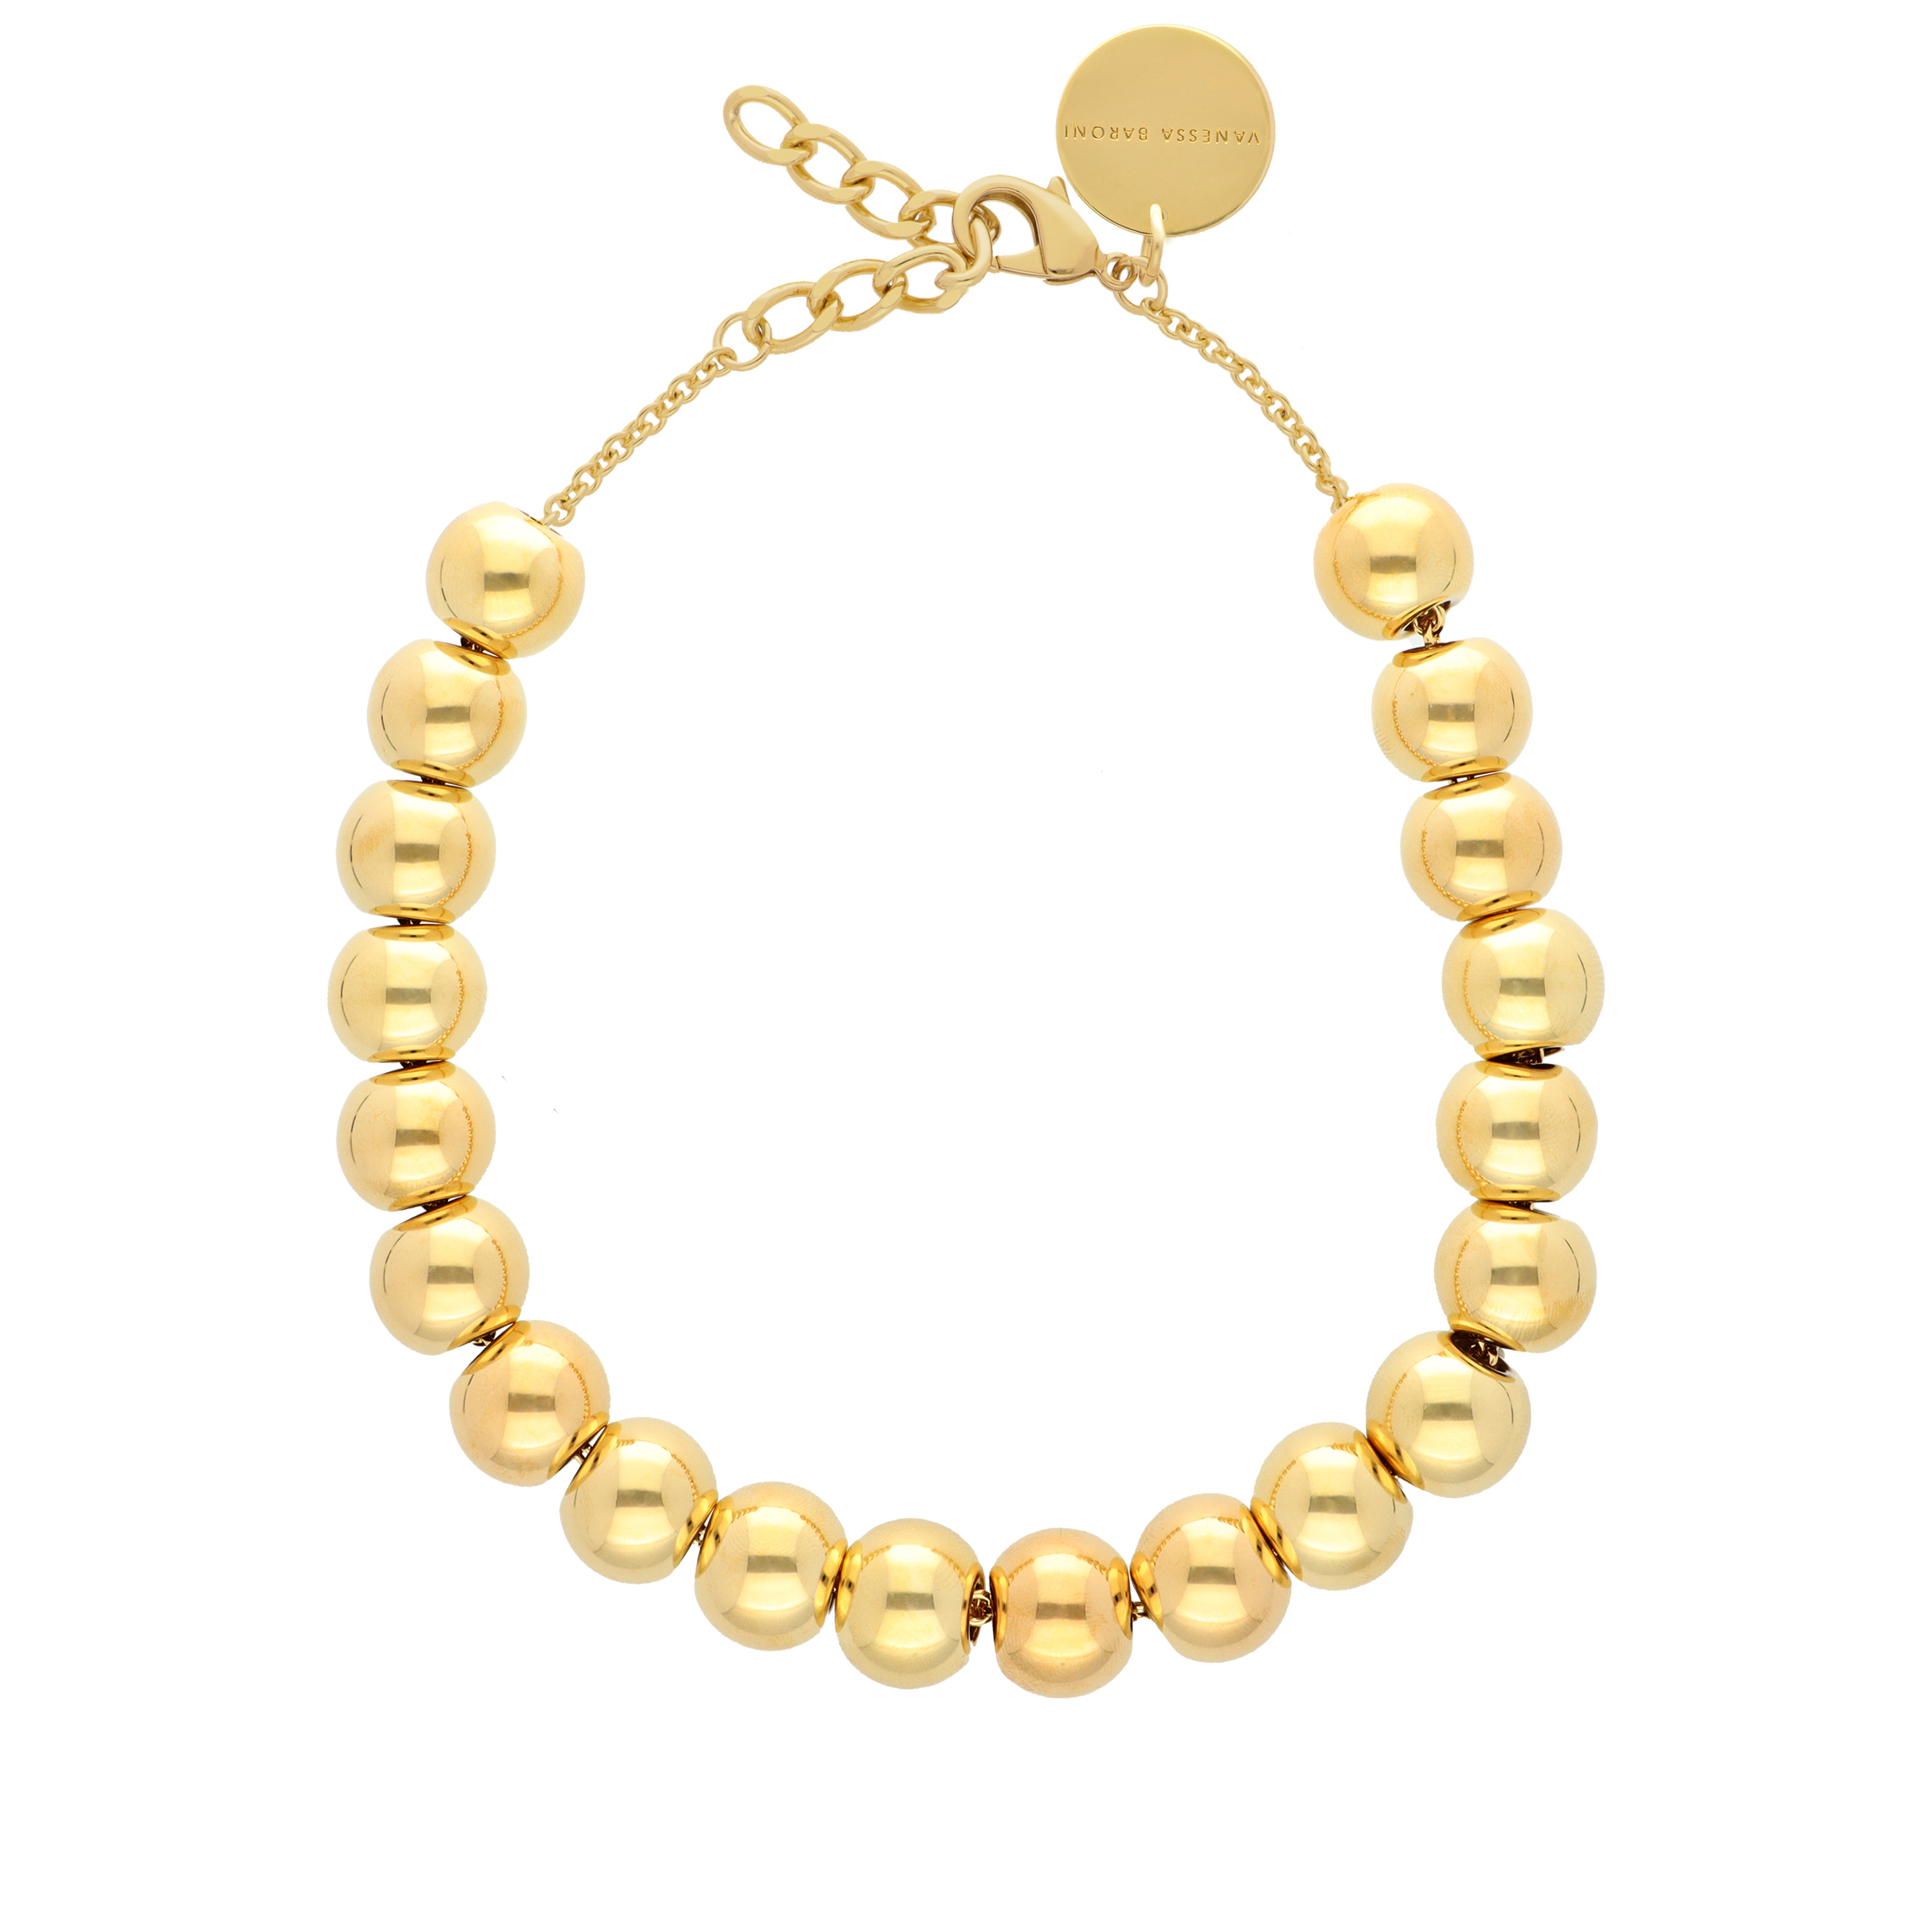 Small Beads Necklace Short Gold